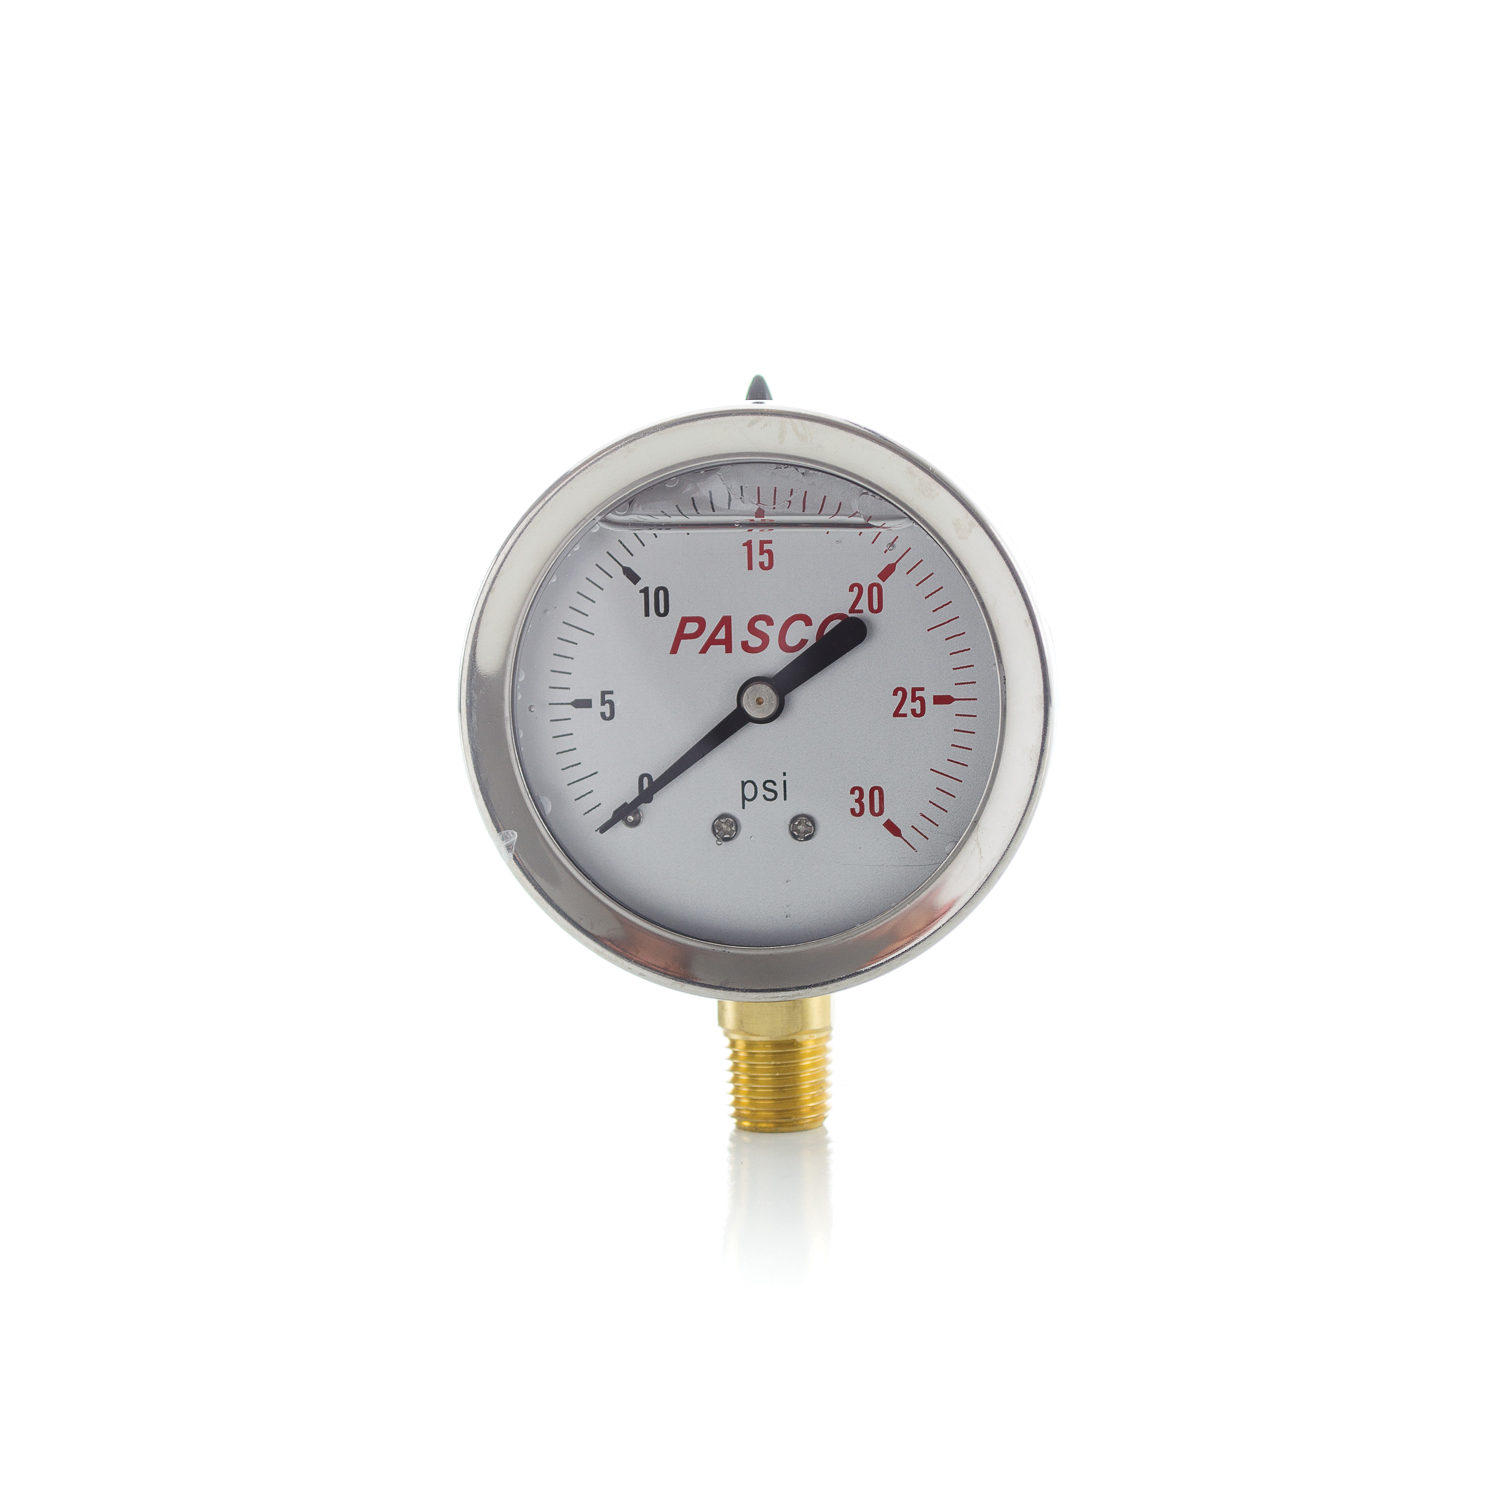 PASCO 1772 Pressure Gauge, 0 to 30 psi, 1/4 in MNPT Connection, 2-1/2 in Dial, +/- 3-2-3 %